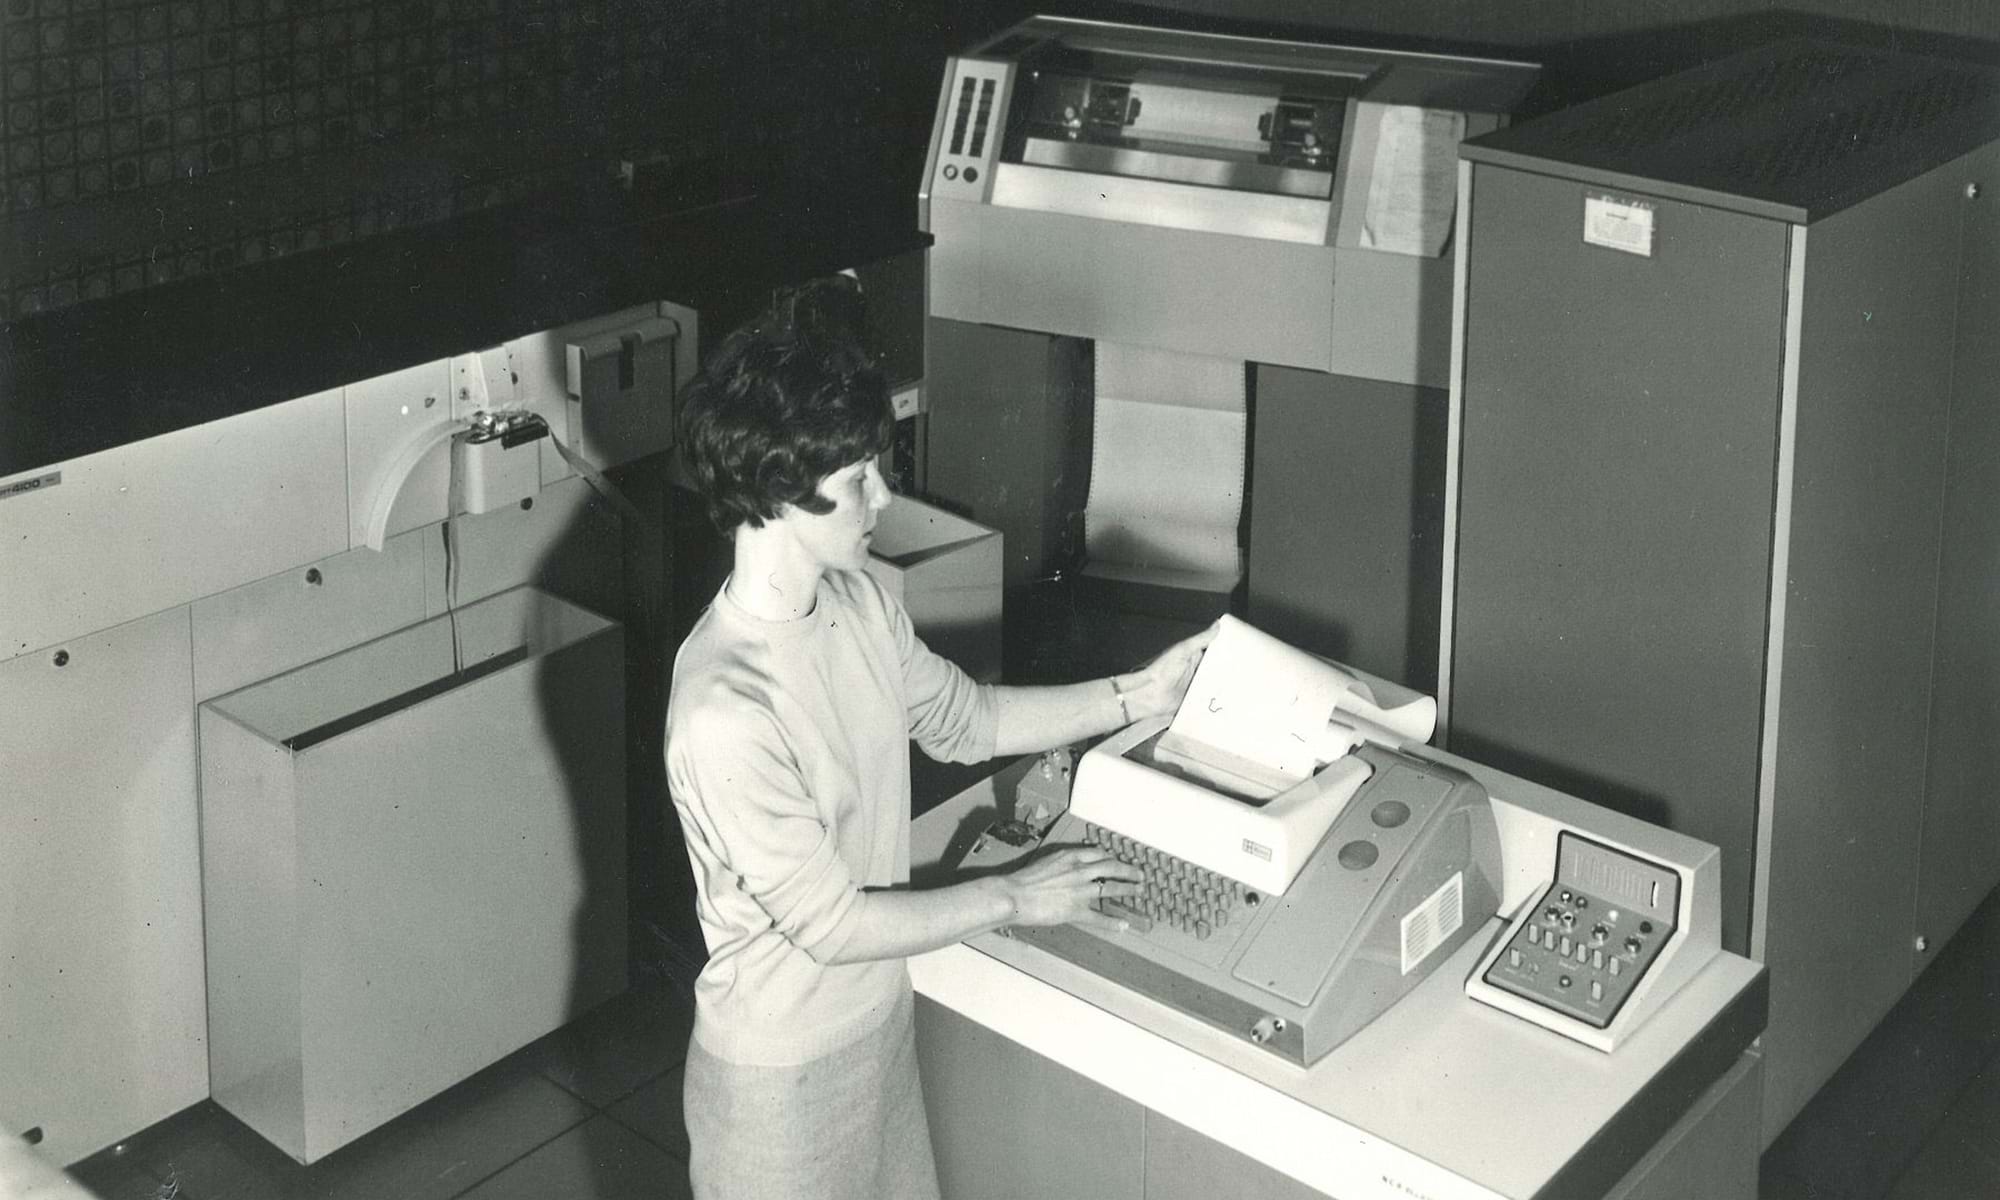 Female staff member at Dundee Institute of Art and Technology (Abertay University) looking at data being printed from a computer in the 1960s